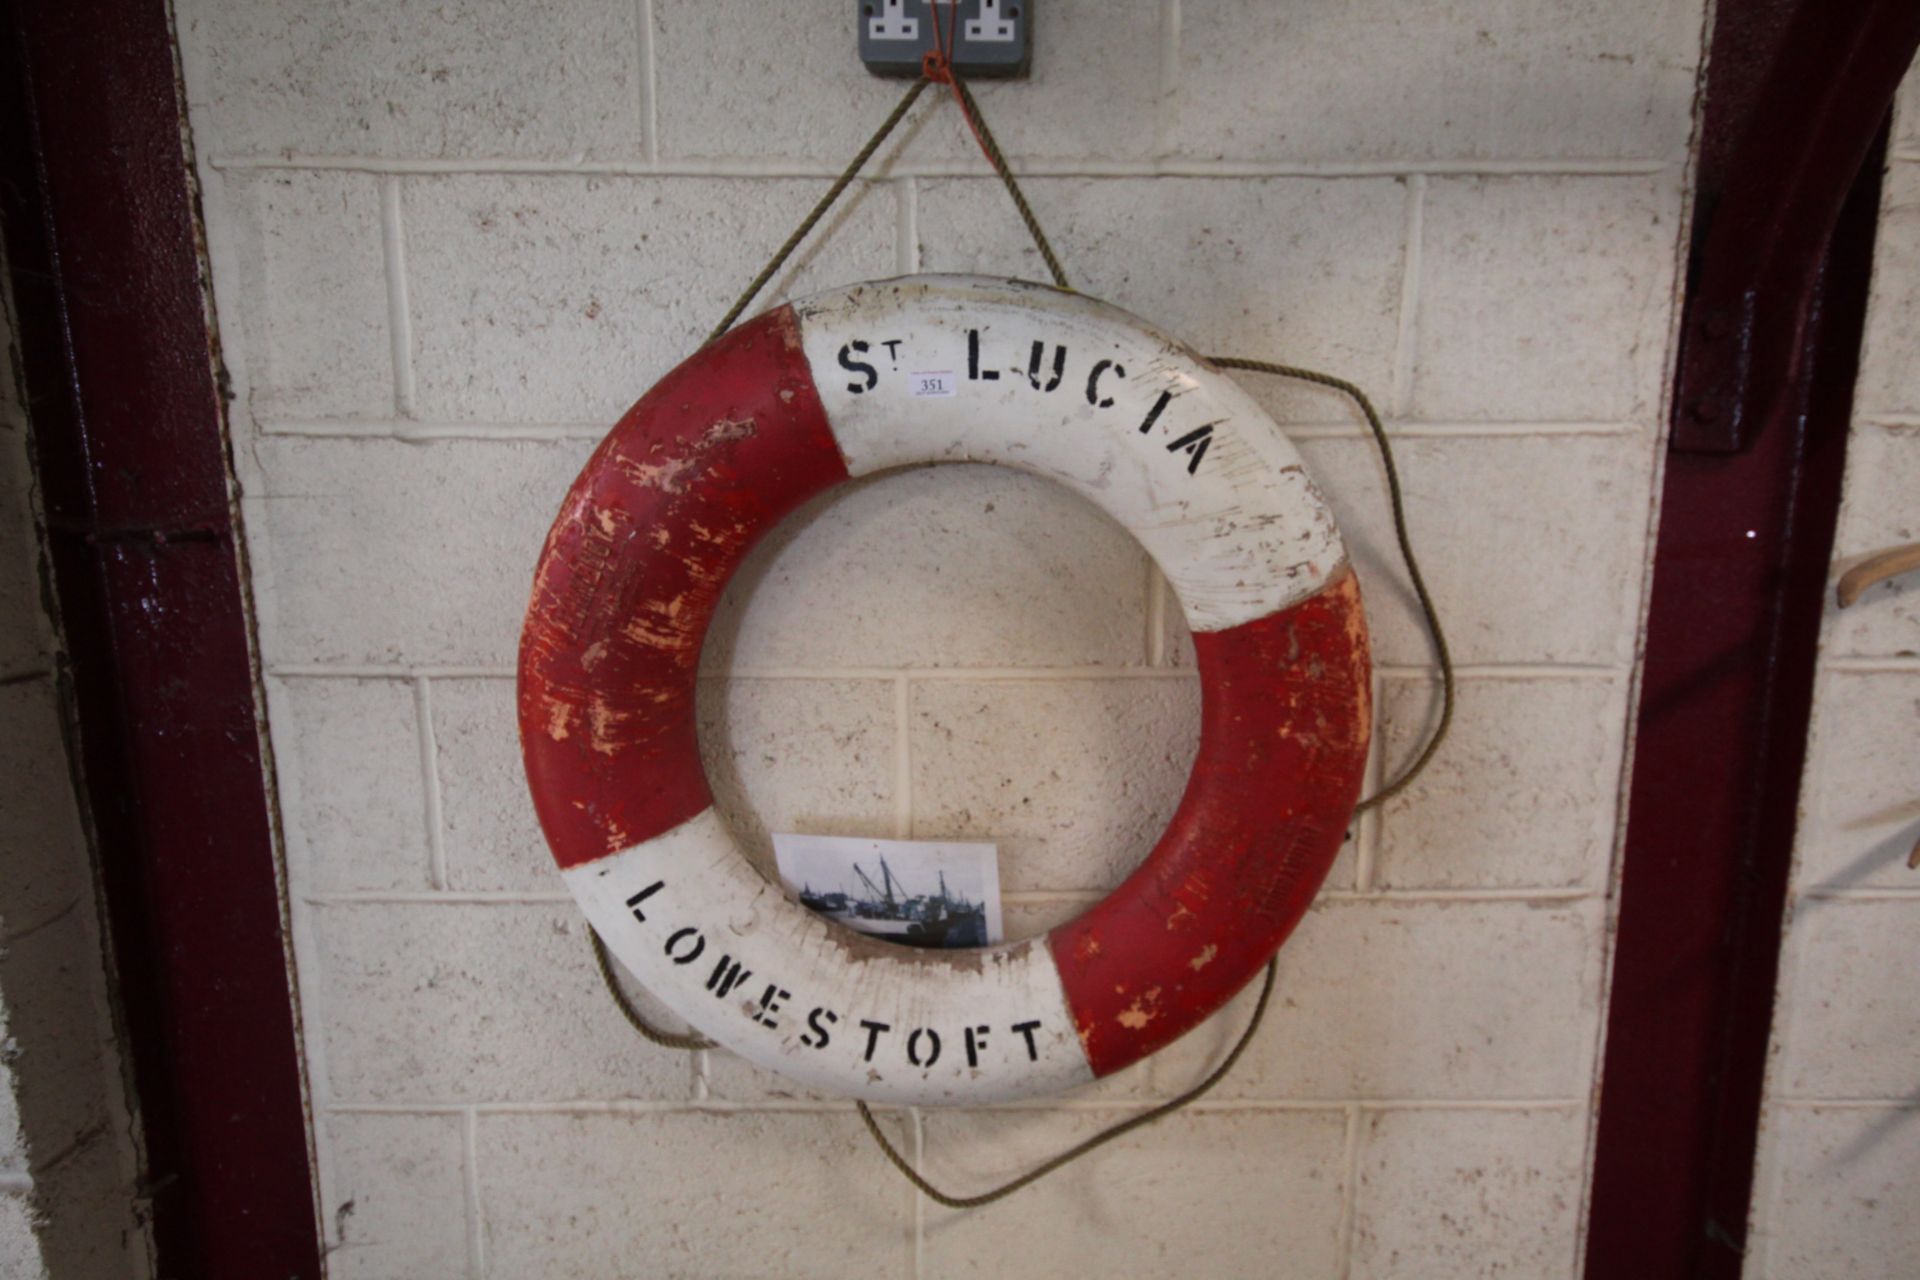 A Life Belt from the St Lucia trawler Lowestoft wi